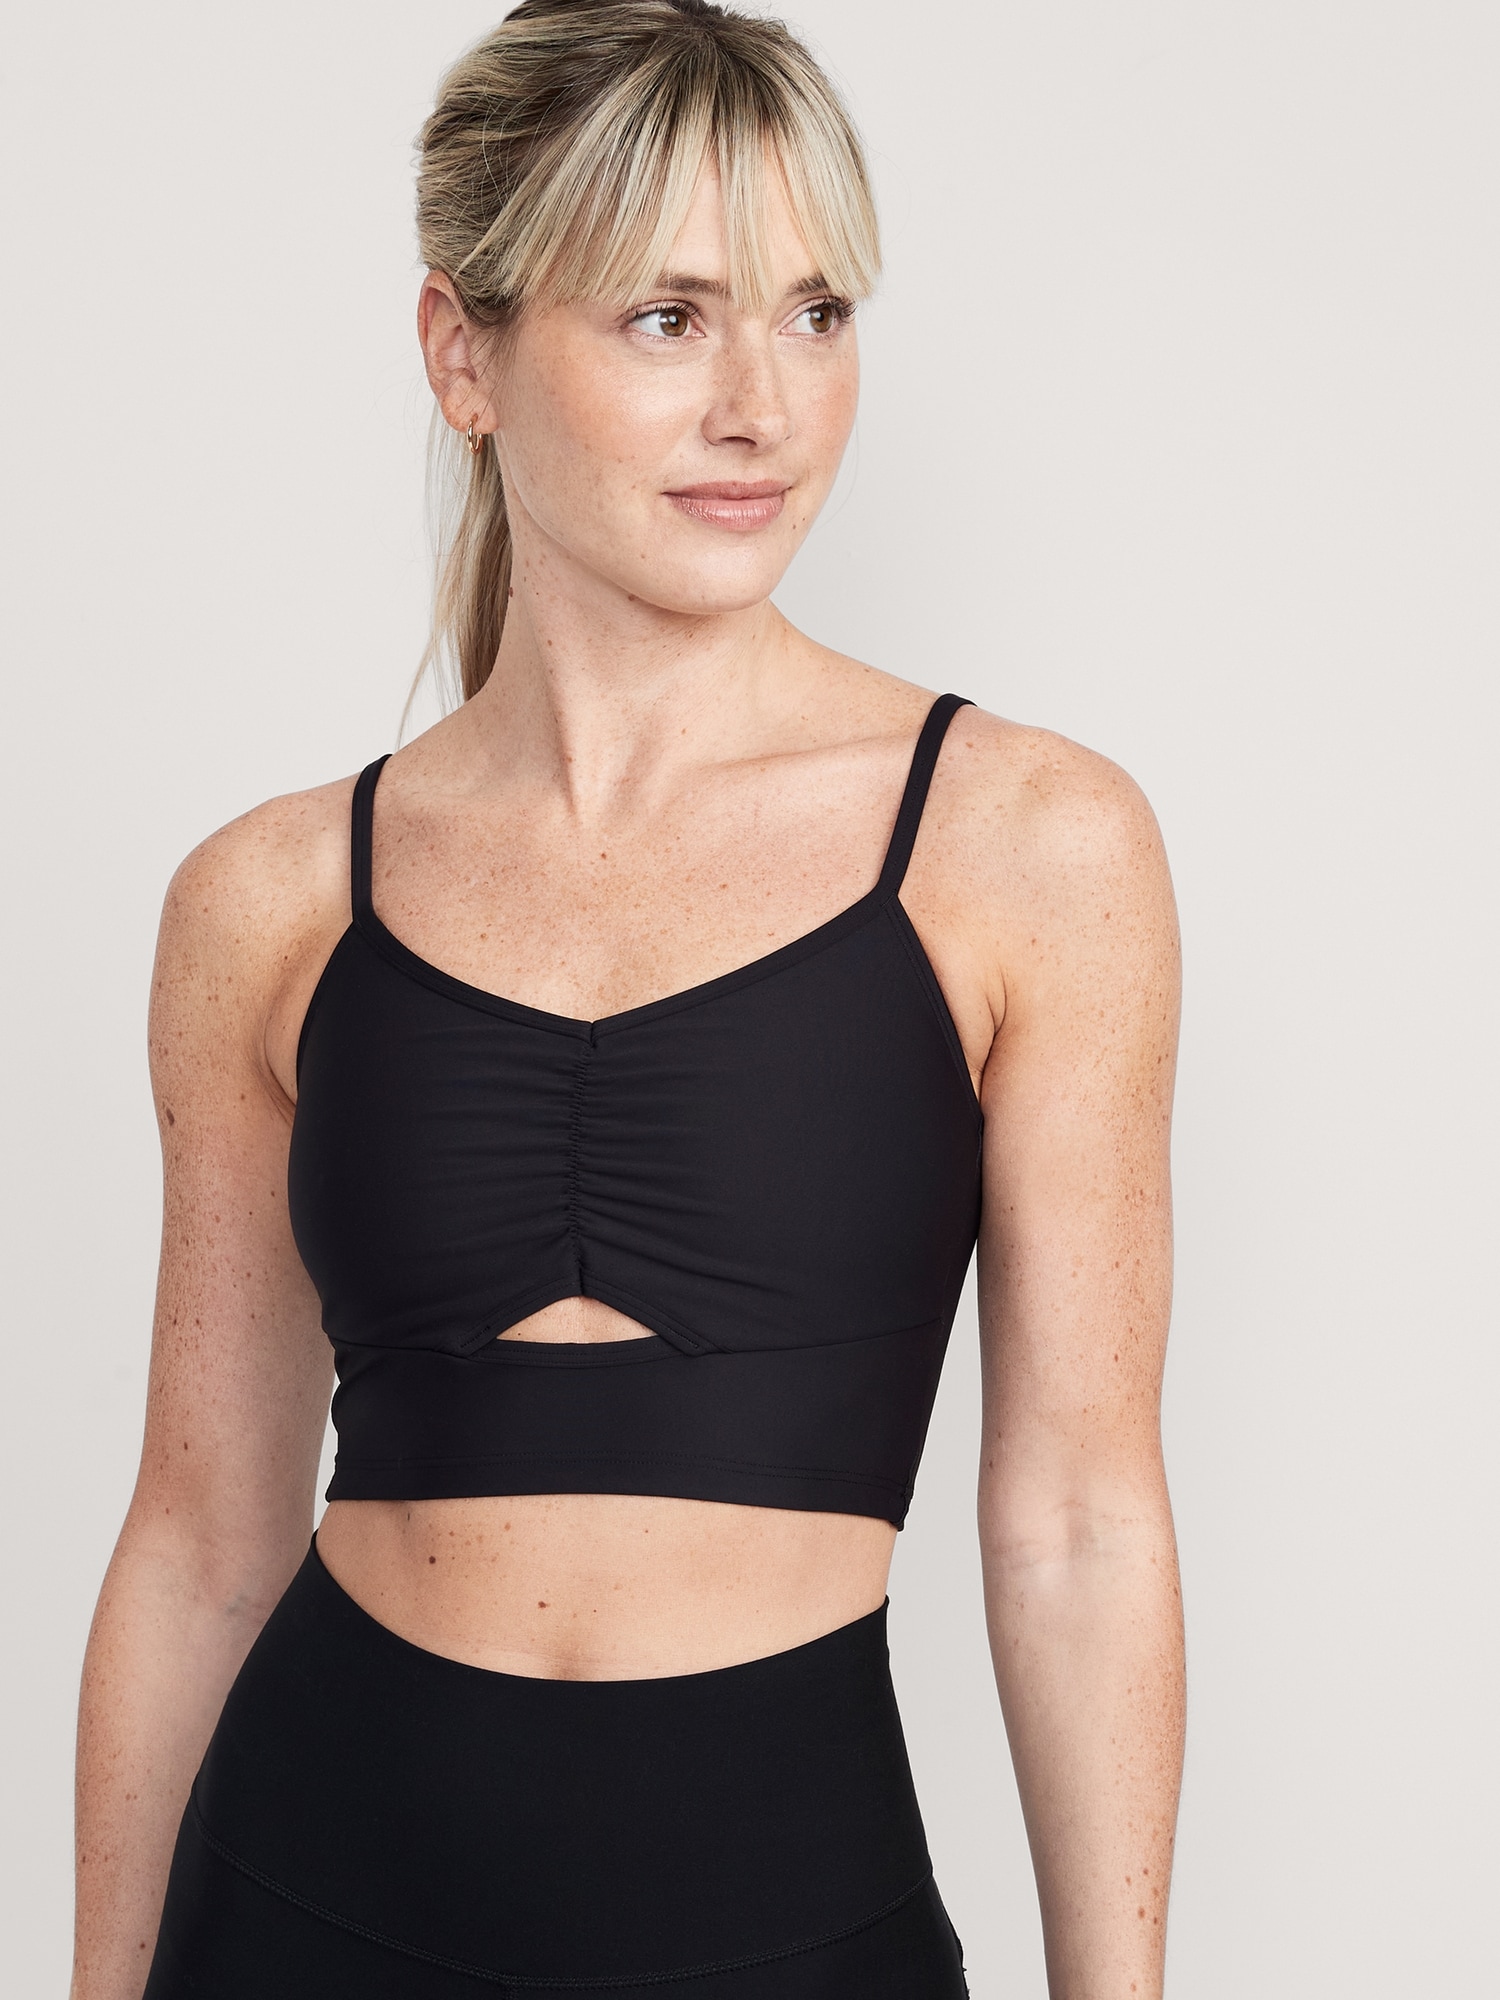 Old Navy Black High-Support PowerSoft Sports Bra Womens Size Large